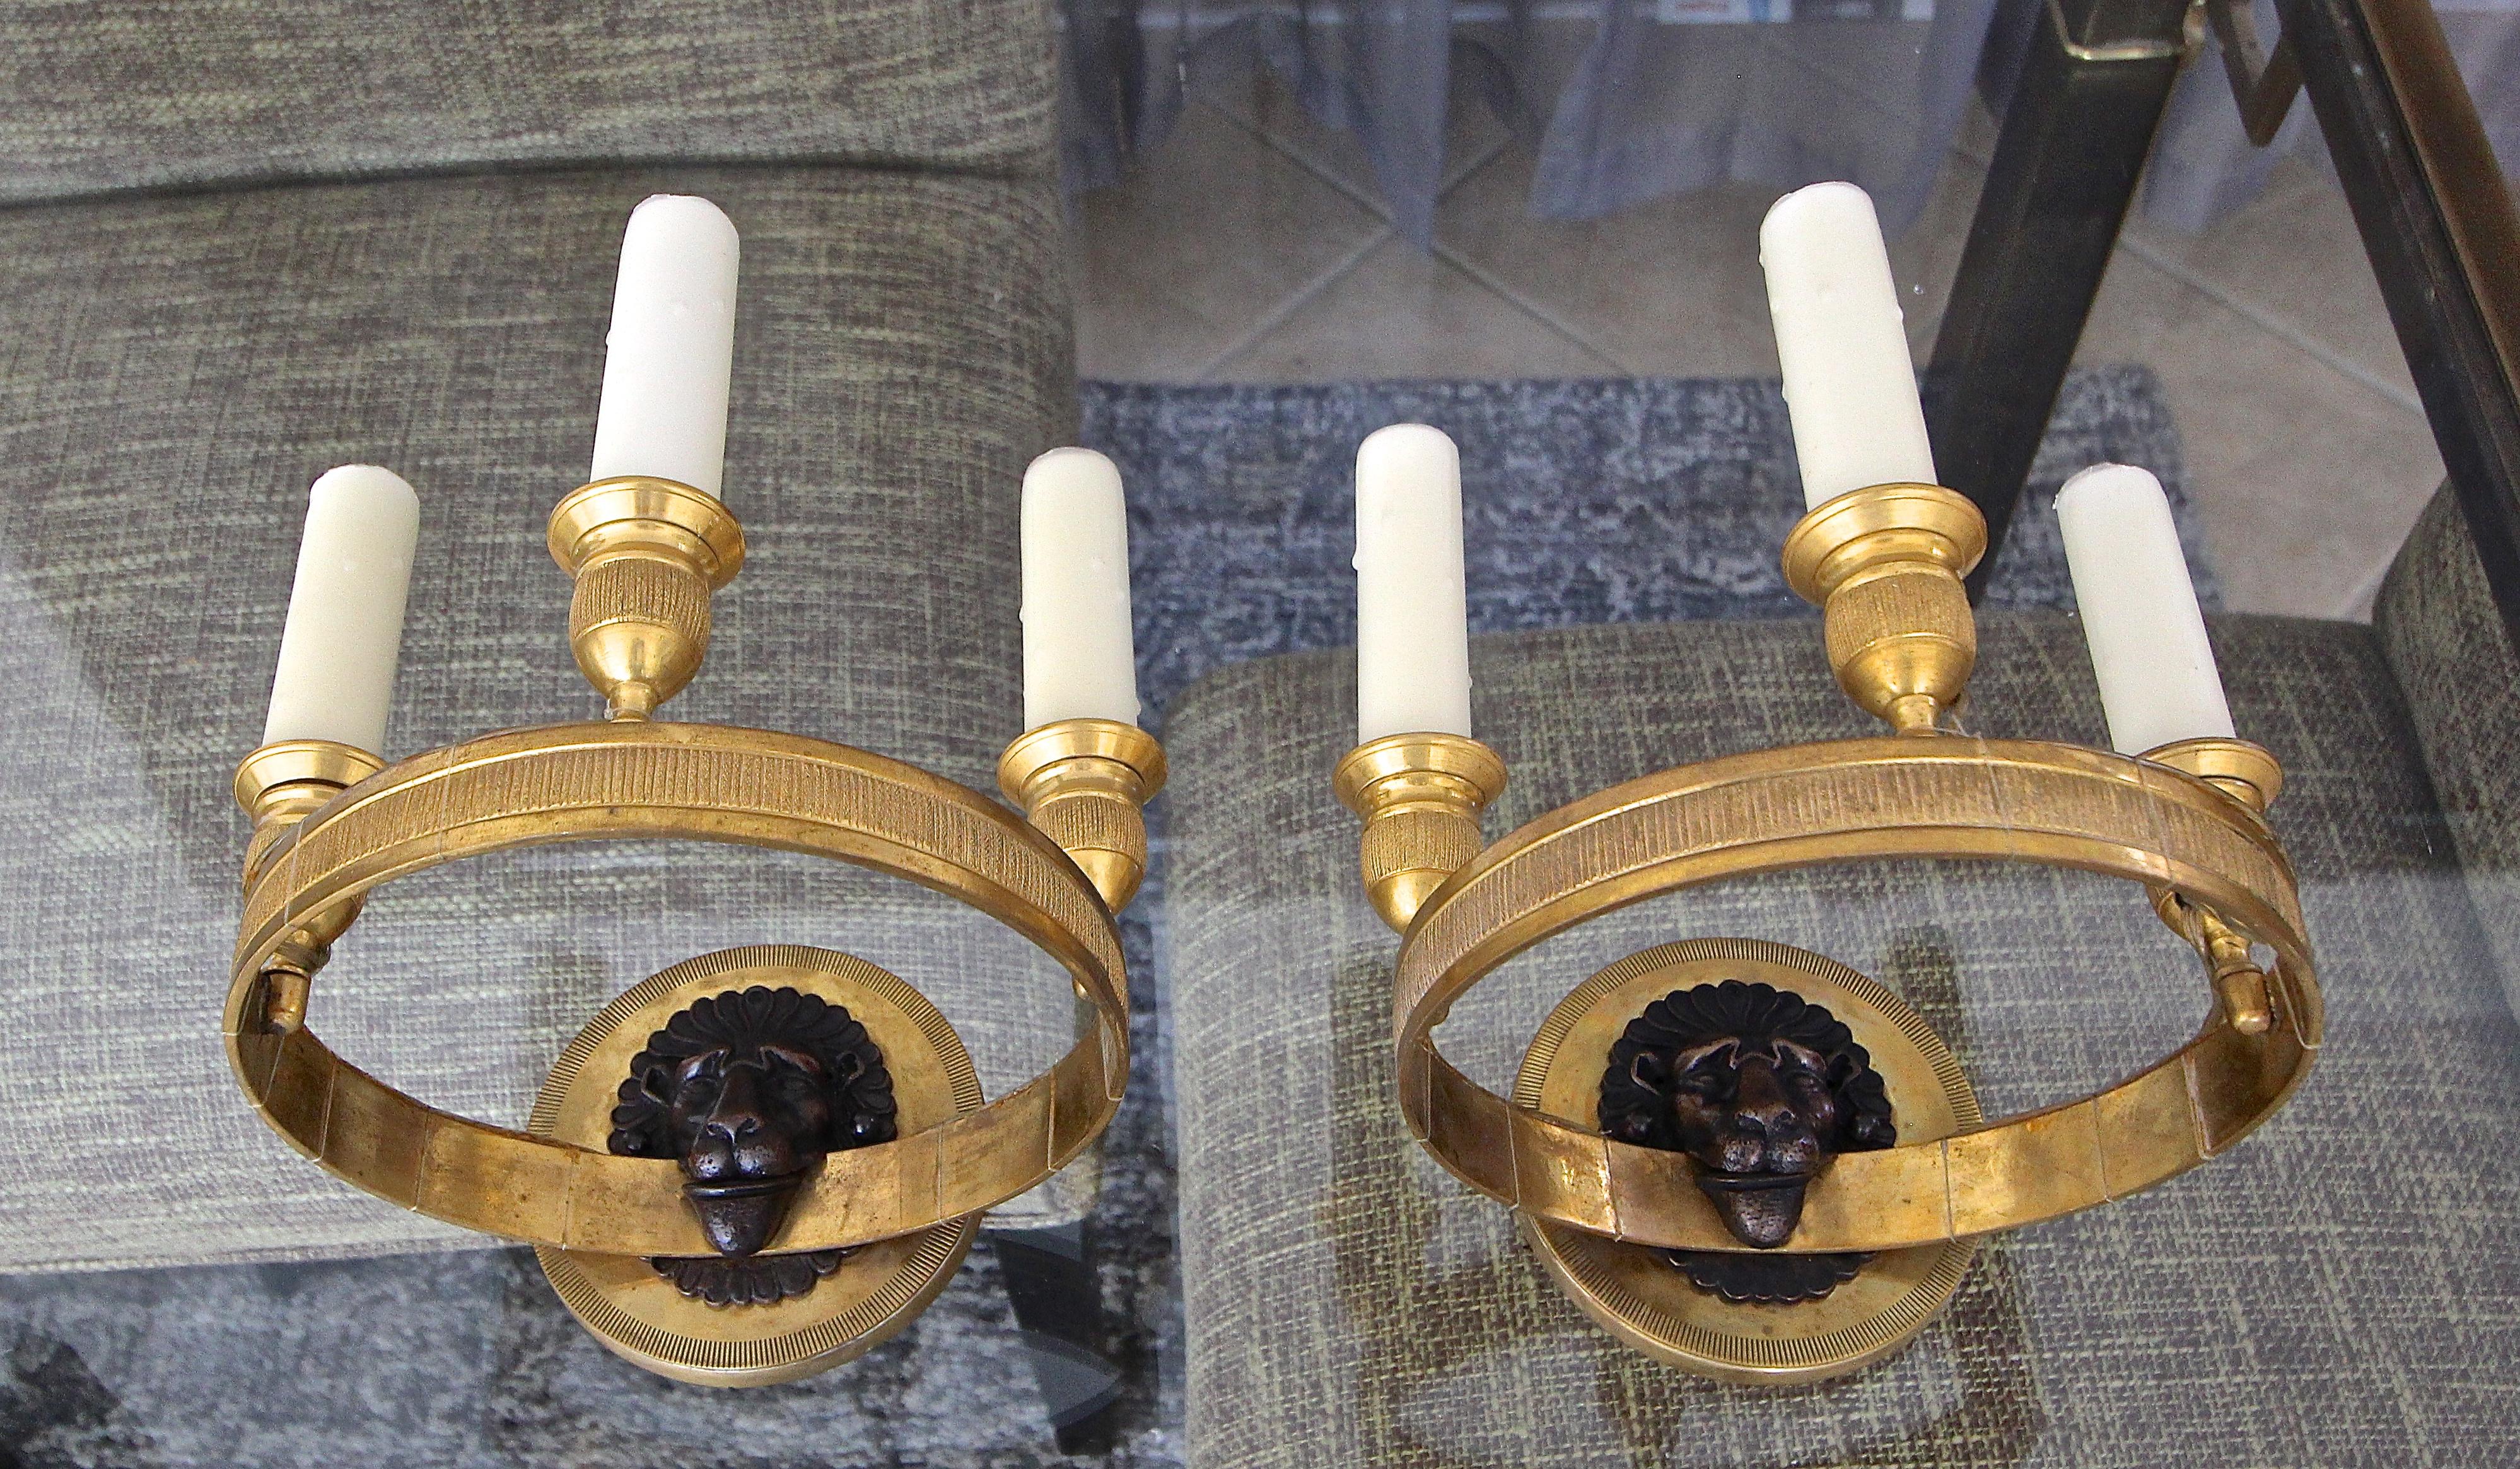 Pair of French brass (or bronze) Directoire style wall sconces with 3-light candleholders. Expert detailing throughout including lion face motif. Each of the 3 lights uses a candelabra size bulb. Back plate 4.5